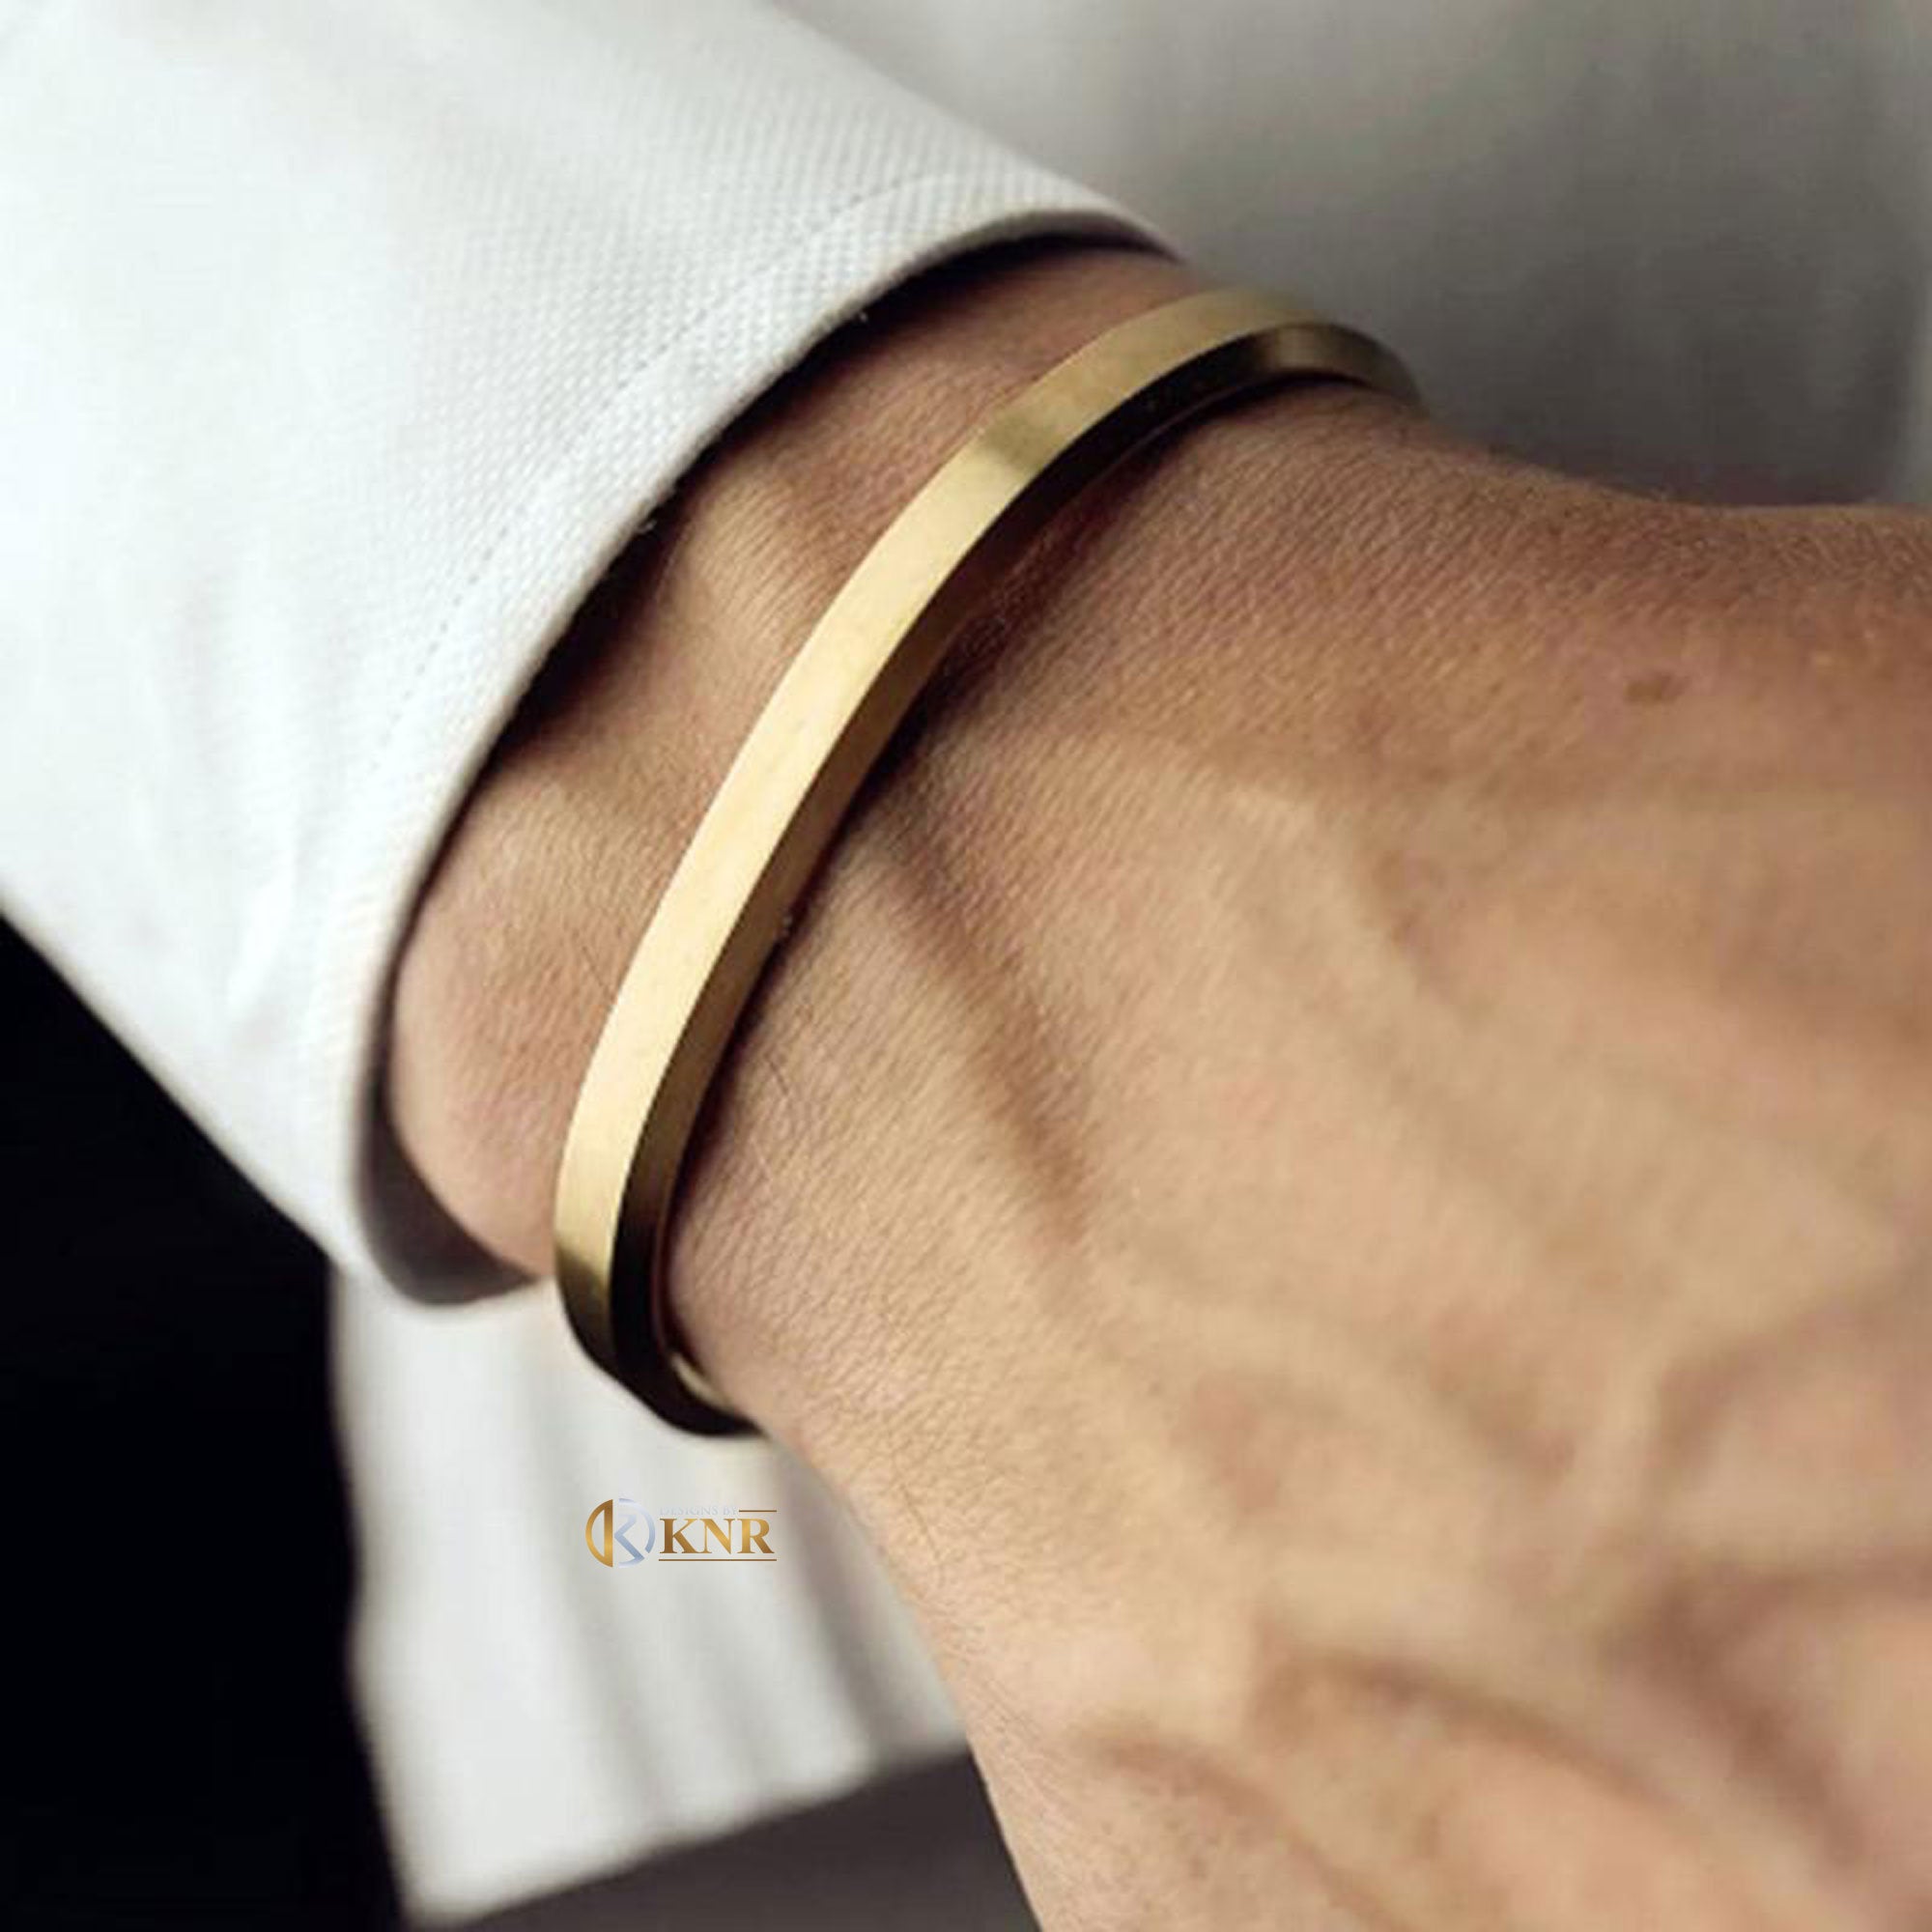 Elegant 14K or 18K Solid and Very Heavy White / Yellow / Or Rose Gold Men's  Cuff Bangle 6mm Width Knife Cut Edges